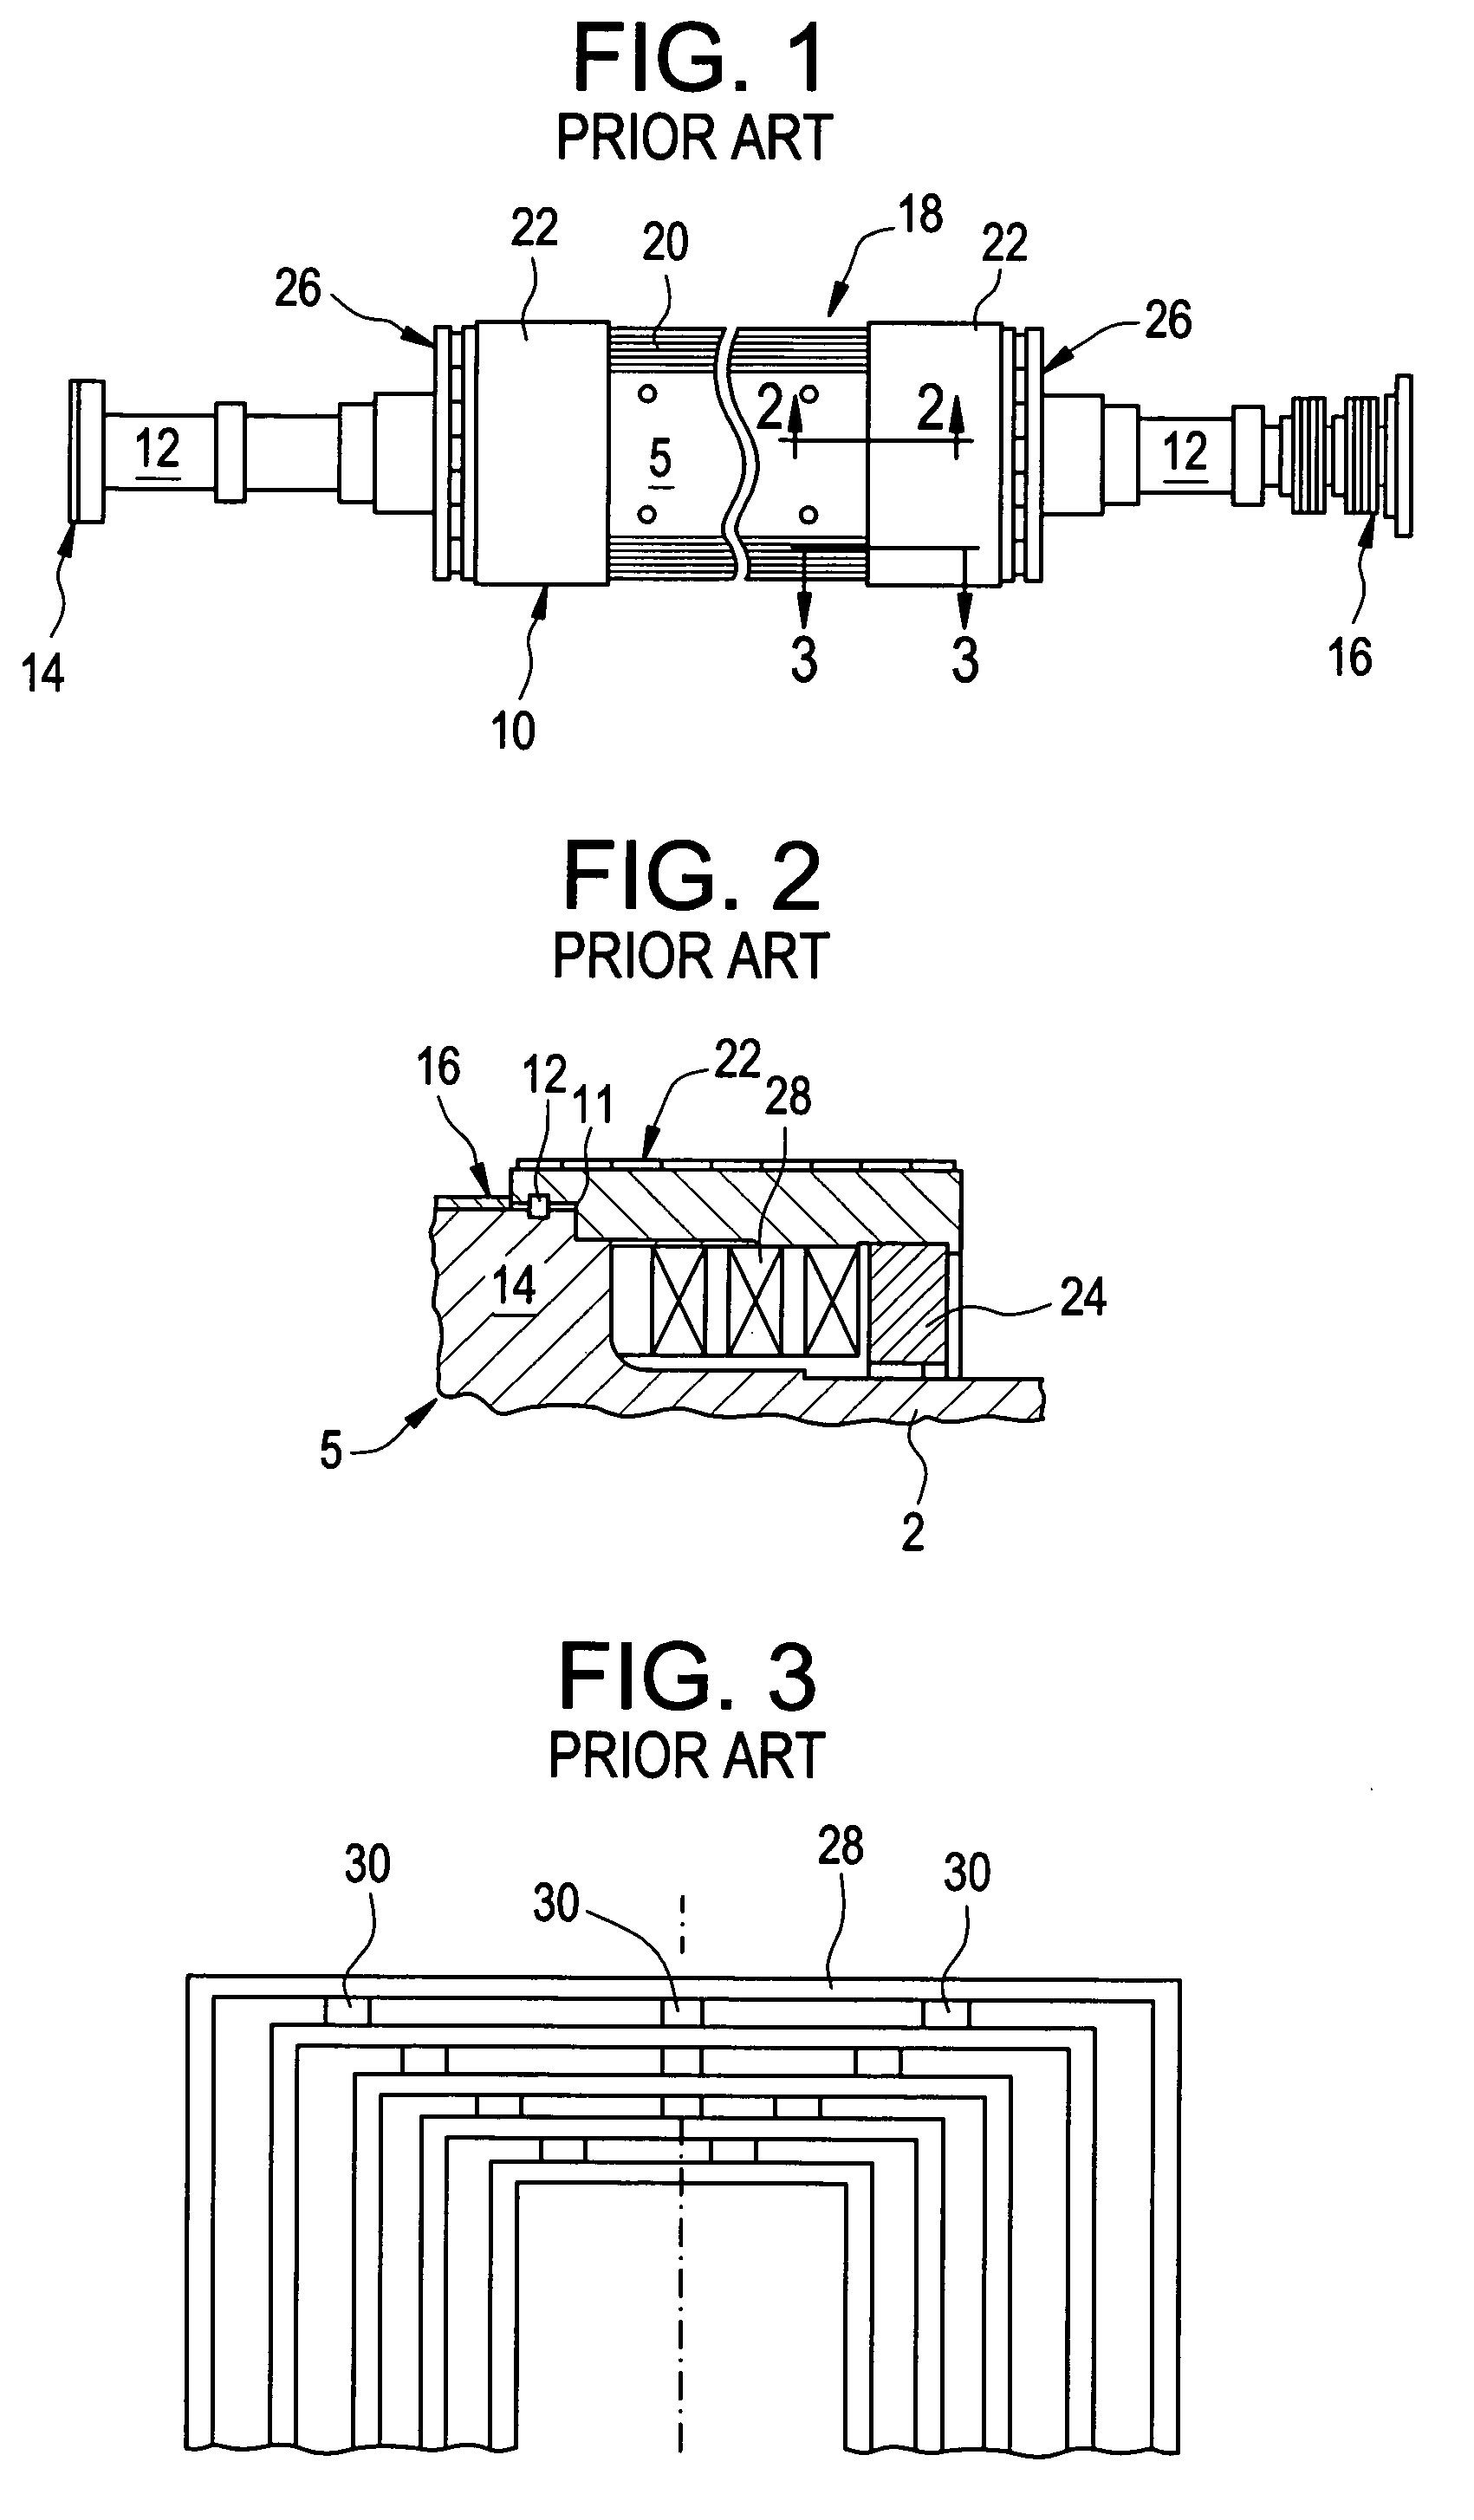 Method and apparatus for reducing hot spot temperatures on stacked field windings